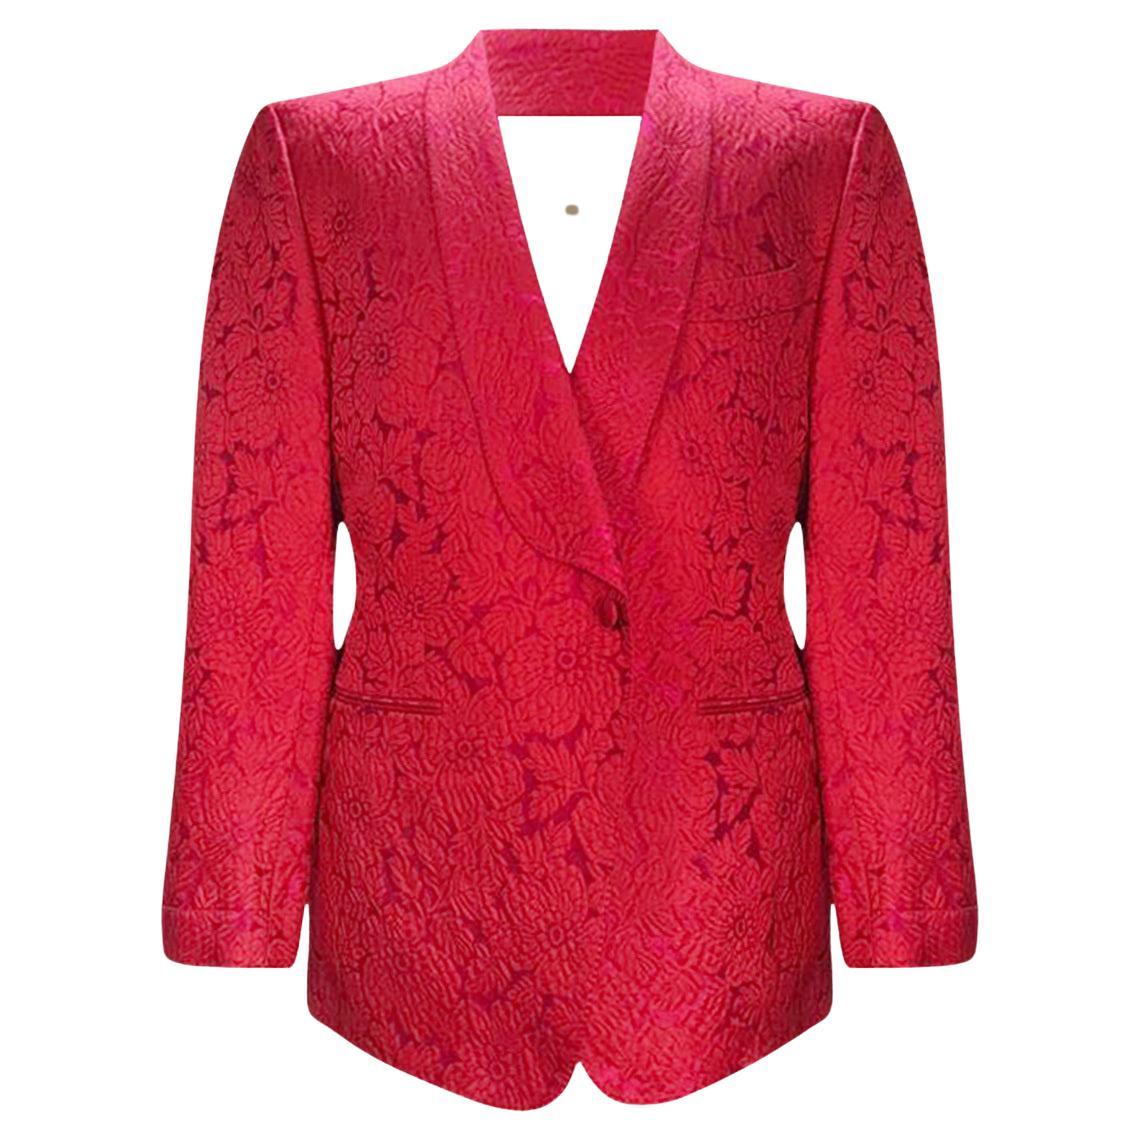 TOM FORD RED COTTON and SILK JACKET w/FLORAL PRINT from CELEBRITY CLOSET EU 58